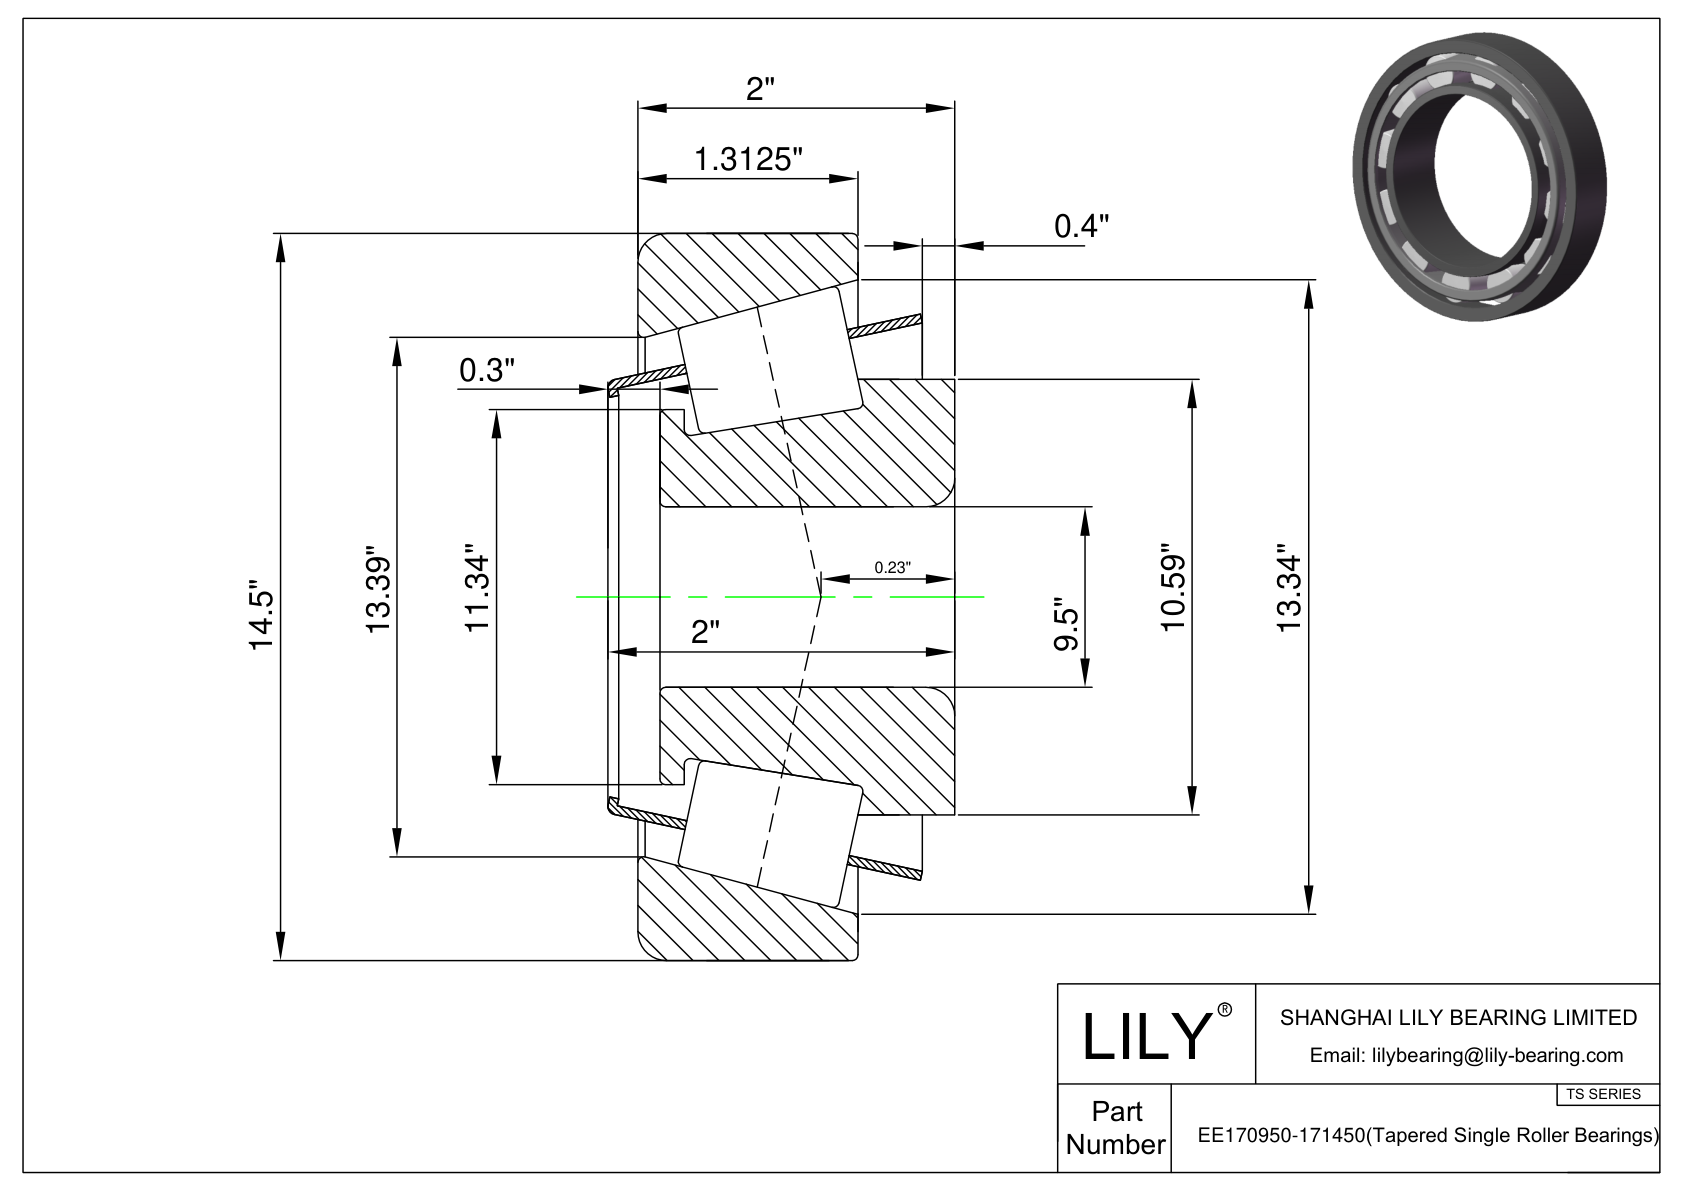 EE170950-171450 TS (Tapered Single Roller Bearings) (Imperial) cad drawing